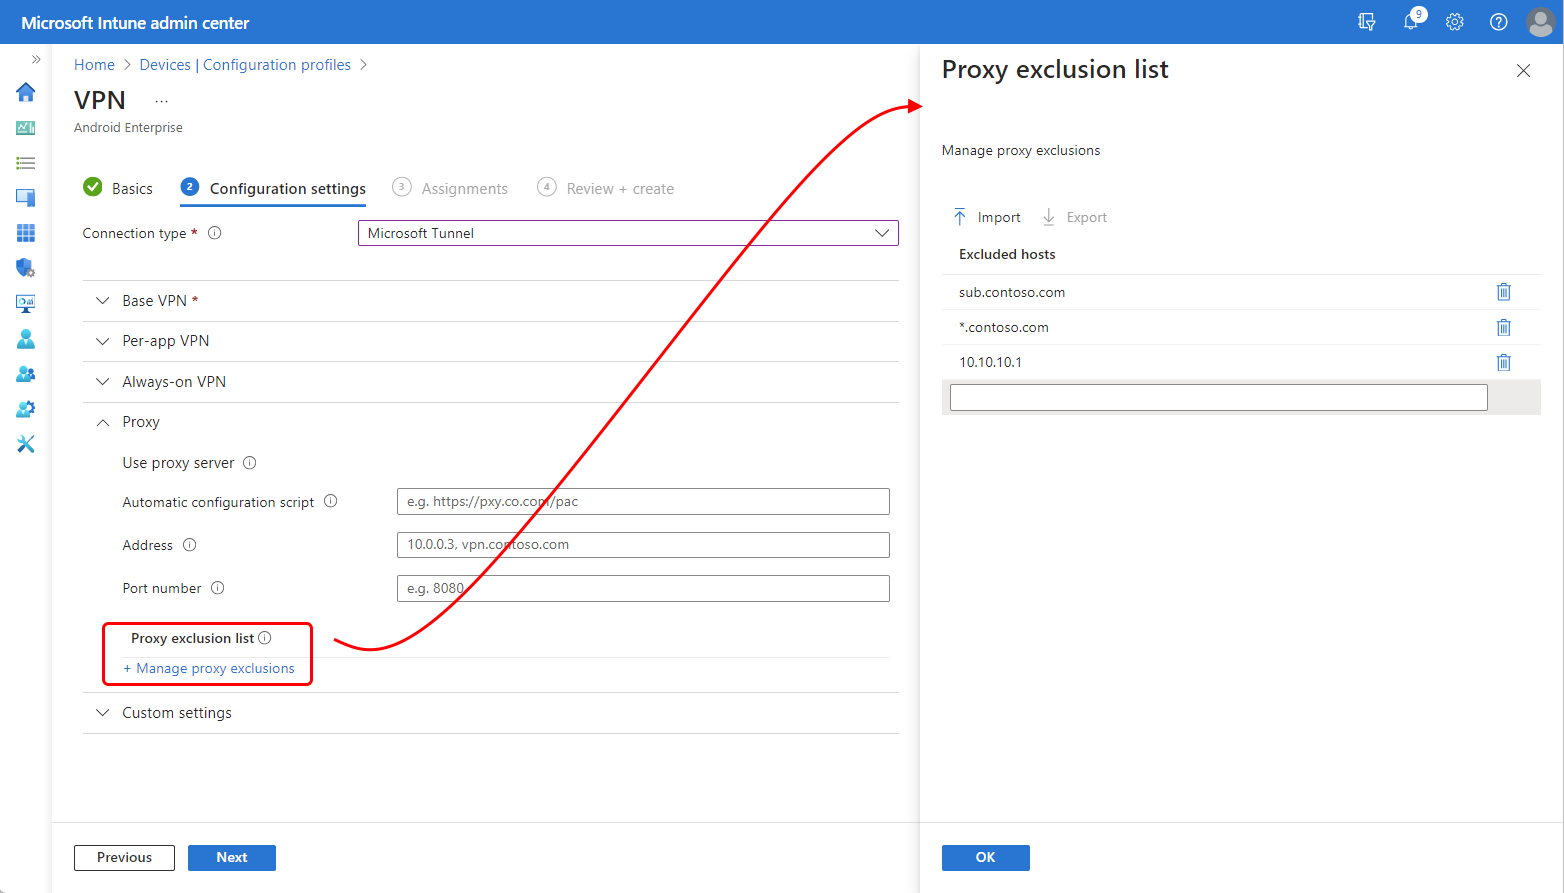 Screen shot of the proxy exclusion list pane in the Intune admin center.